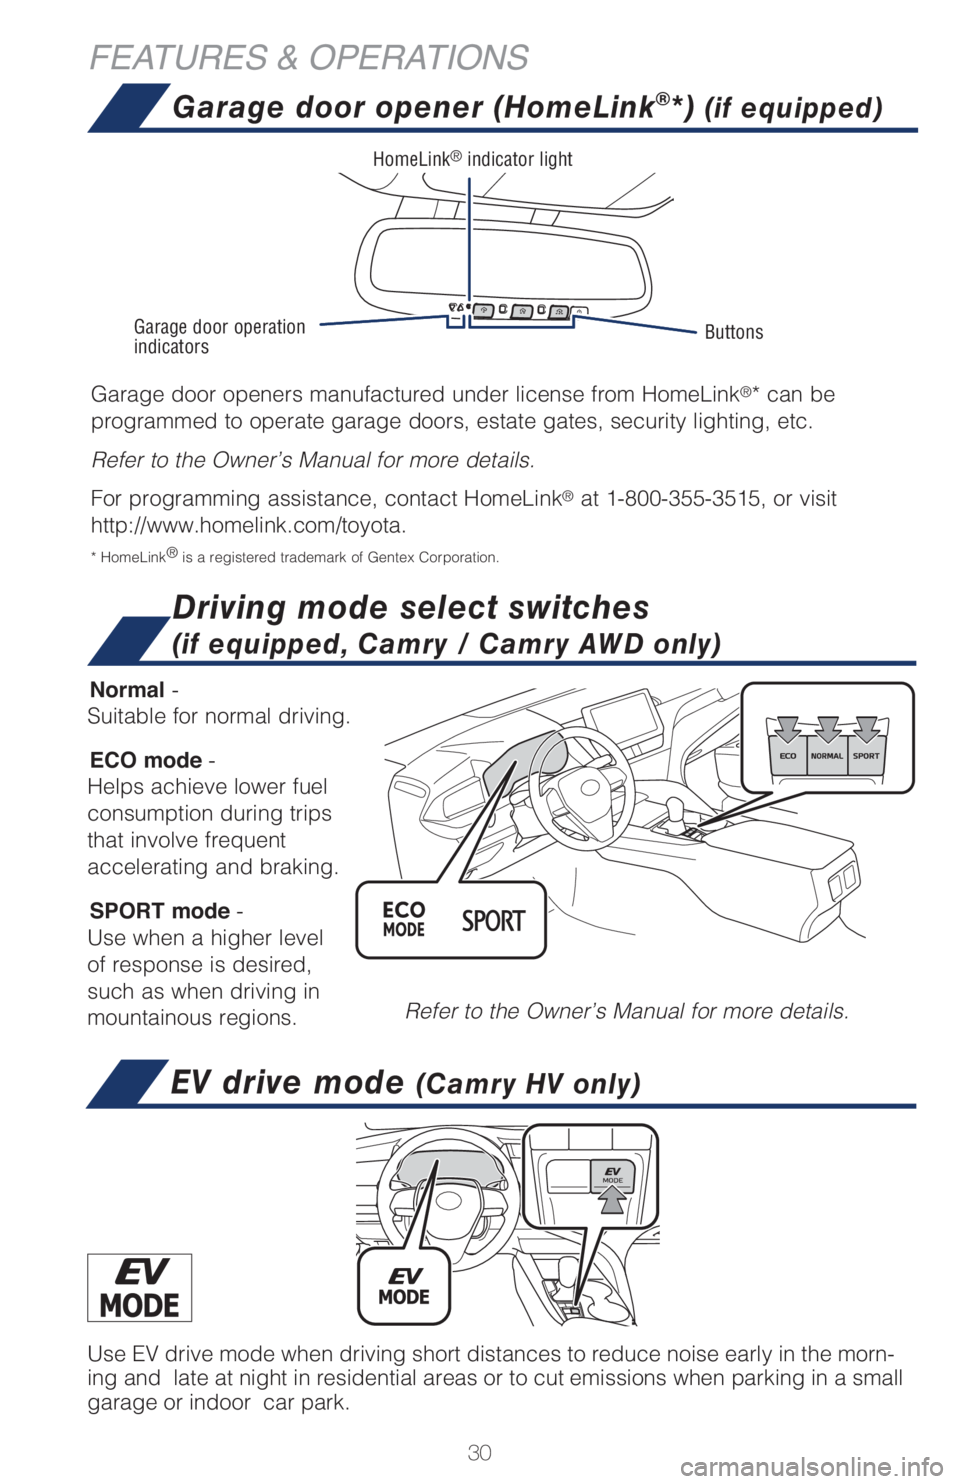 TOYOTA CAMRY 2021  Owners Manual (in English) 30
FEATURES & OPERATIONS
Garage door opener (HomeLink®*) (if equipped)
Garage door openers manufactured under license from HomeLink®* can be 
programmed to operate garage doors, estate gates, securi